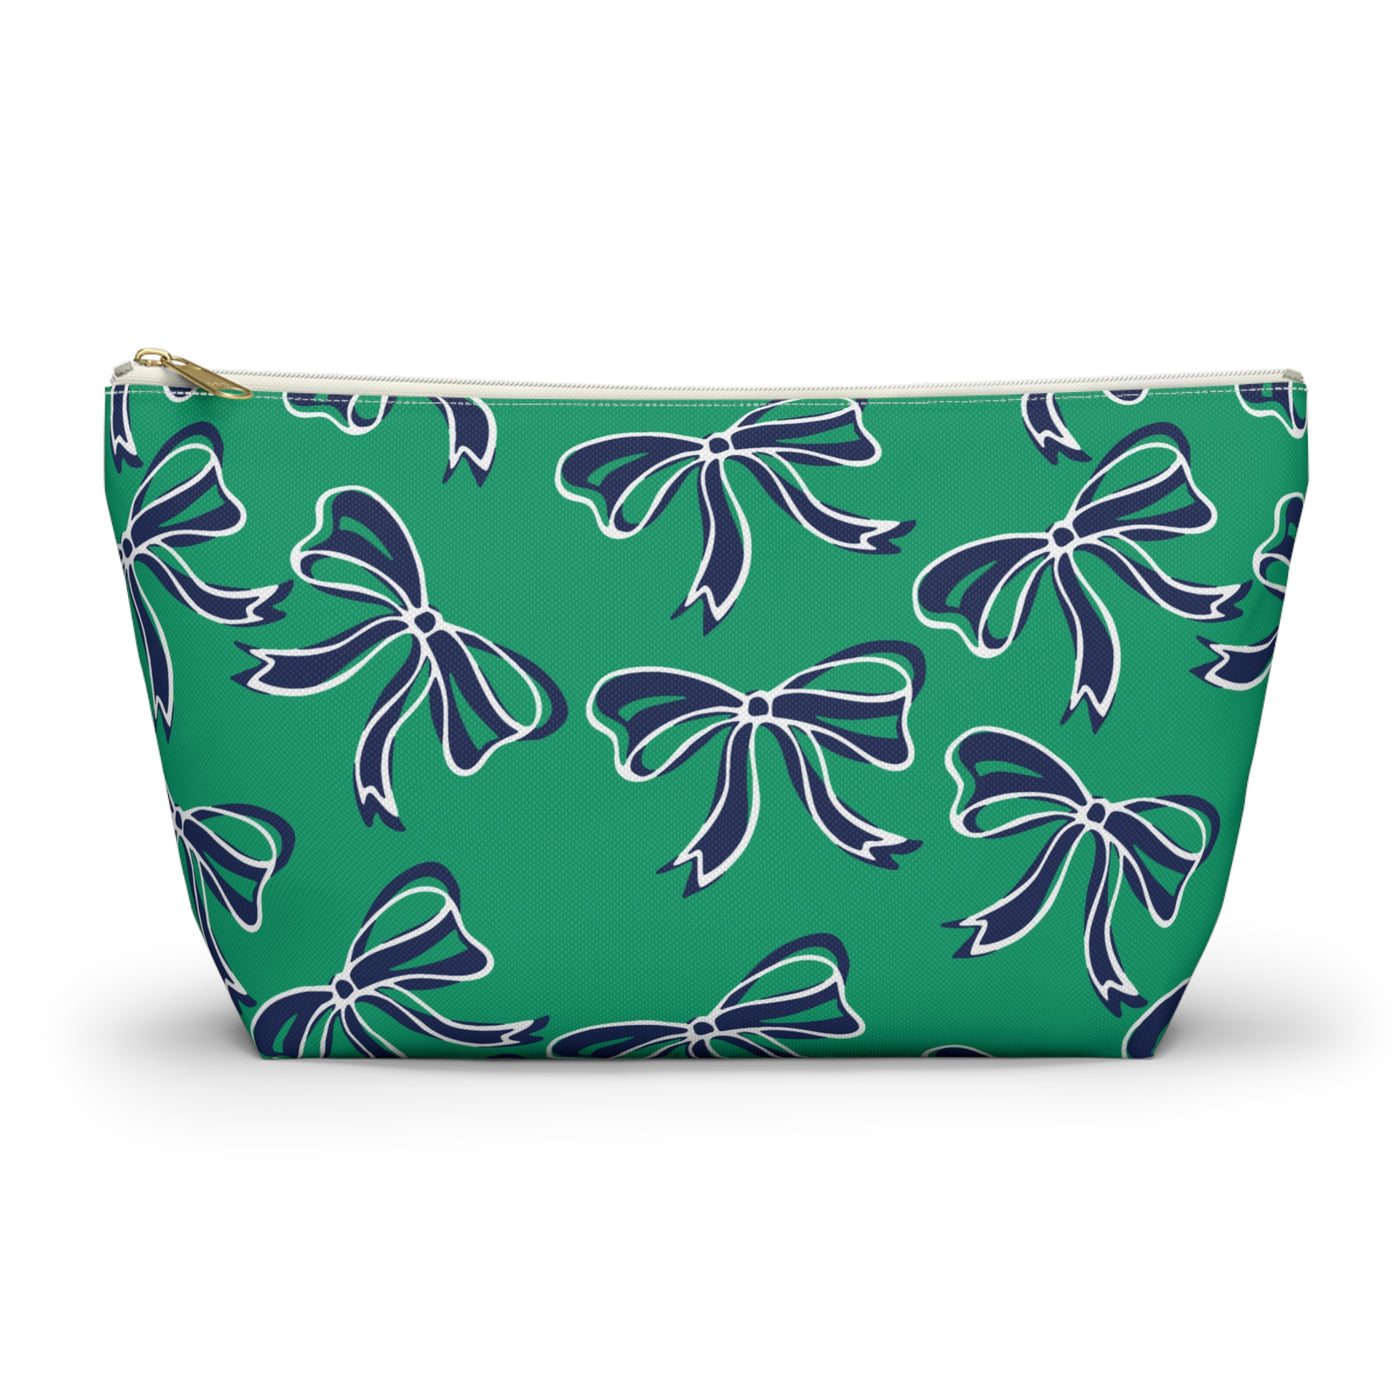 Trendy Bow Makeup Bag - Graduation Gift, Bed Party Gift, Acceptance Gift, College Gift, Notre Dame, green and blue